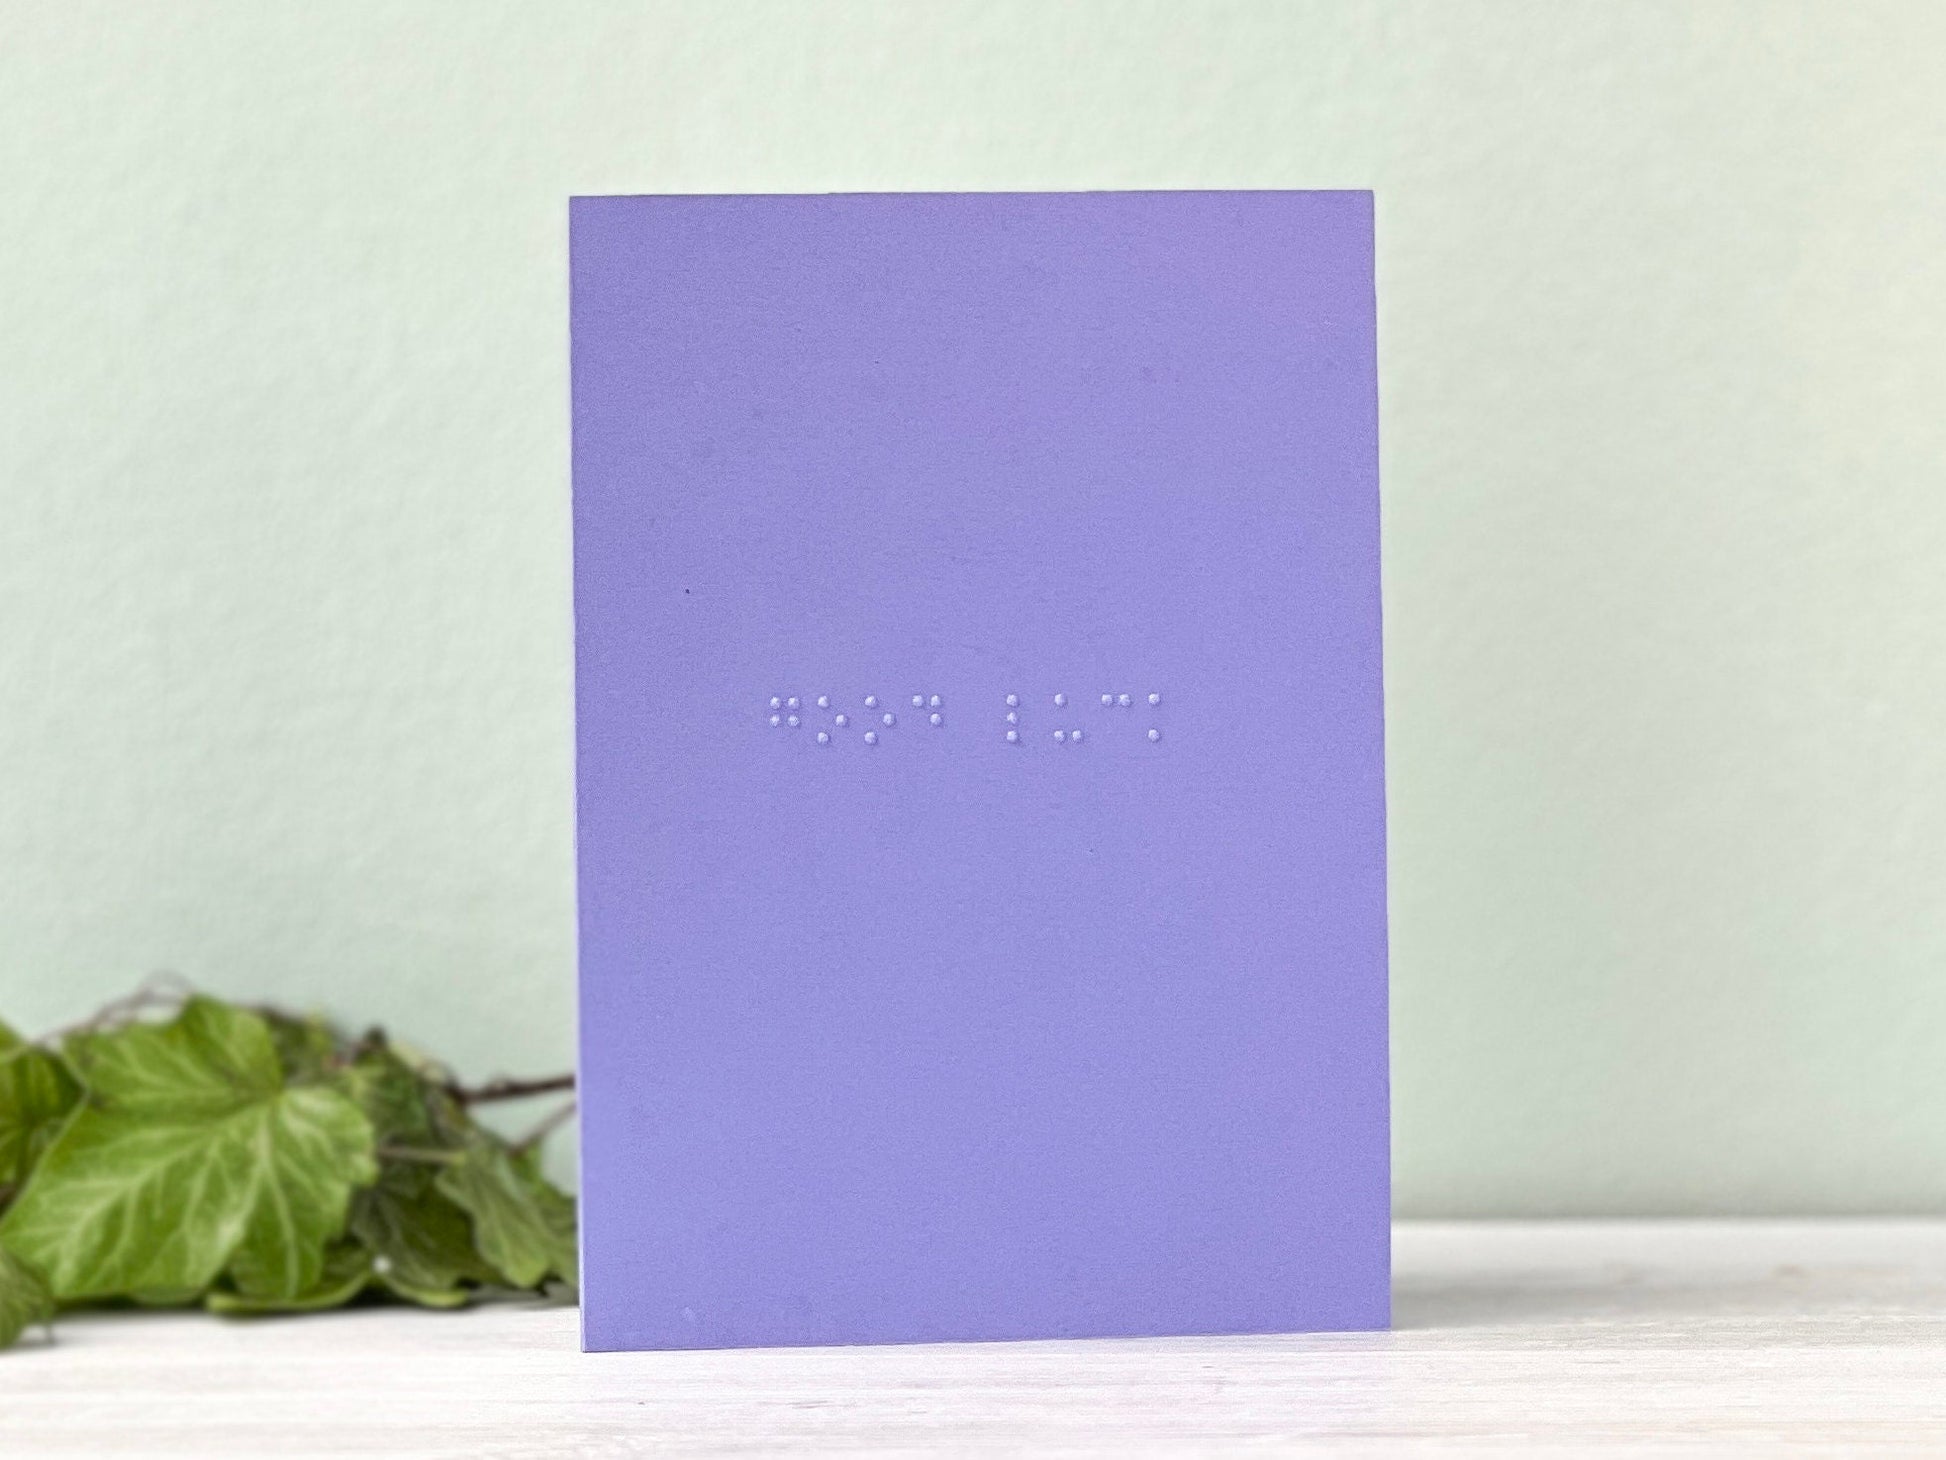 A portrait vibrant card with good luck written in grade 1 braille.